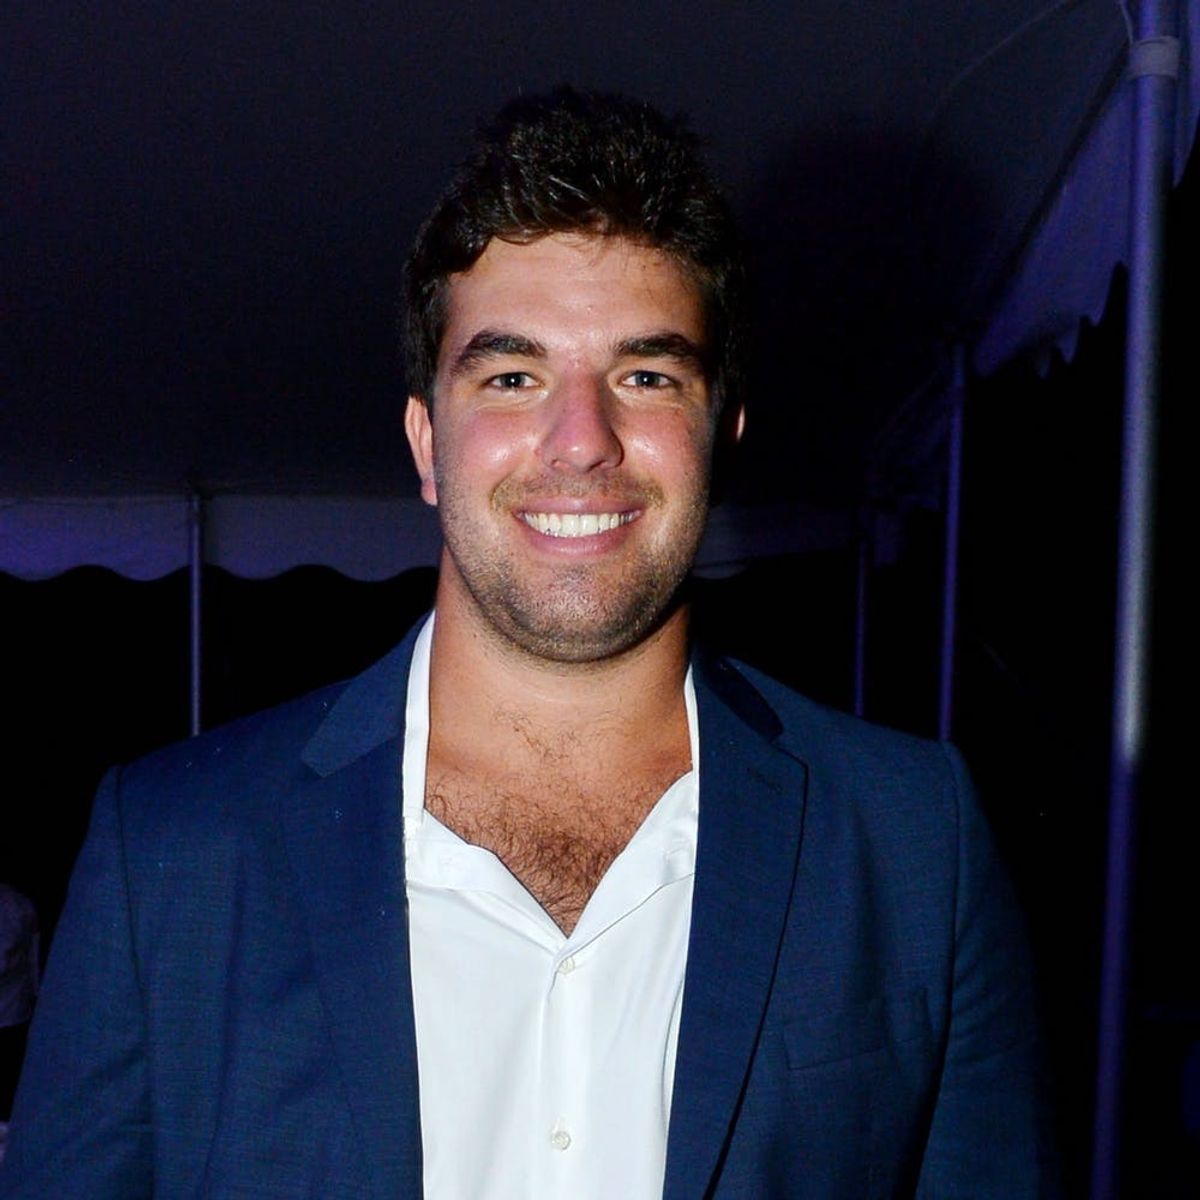 Fyre Festival Founder Billy McFarland Could Face Up to 20 Years of Jail Time